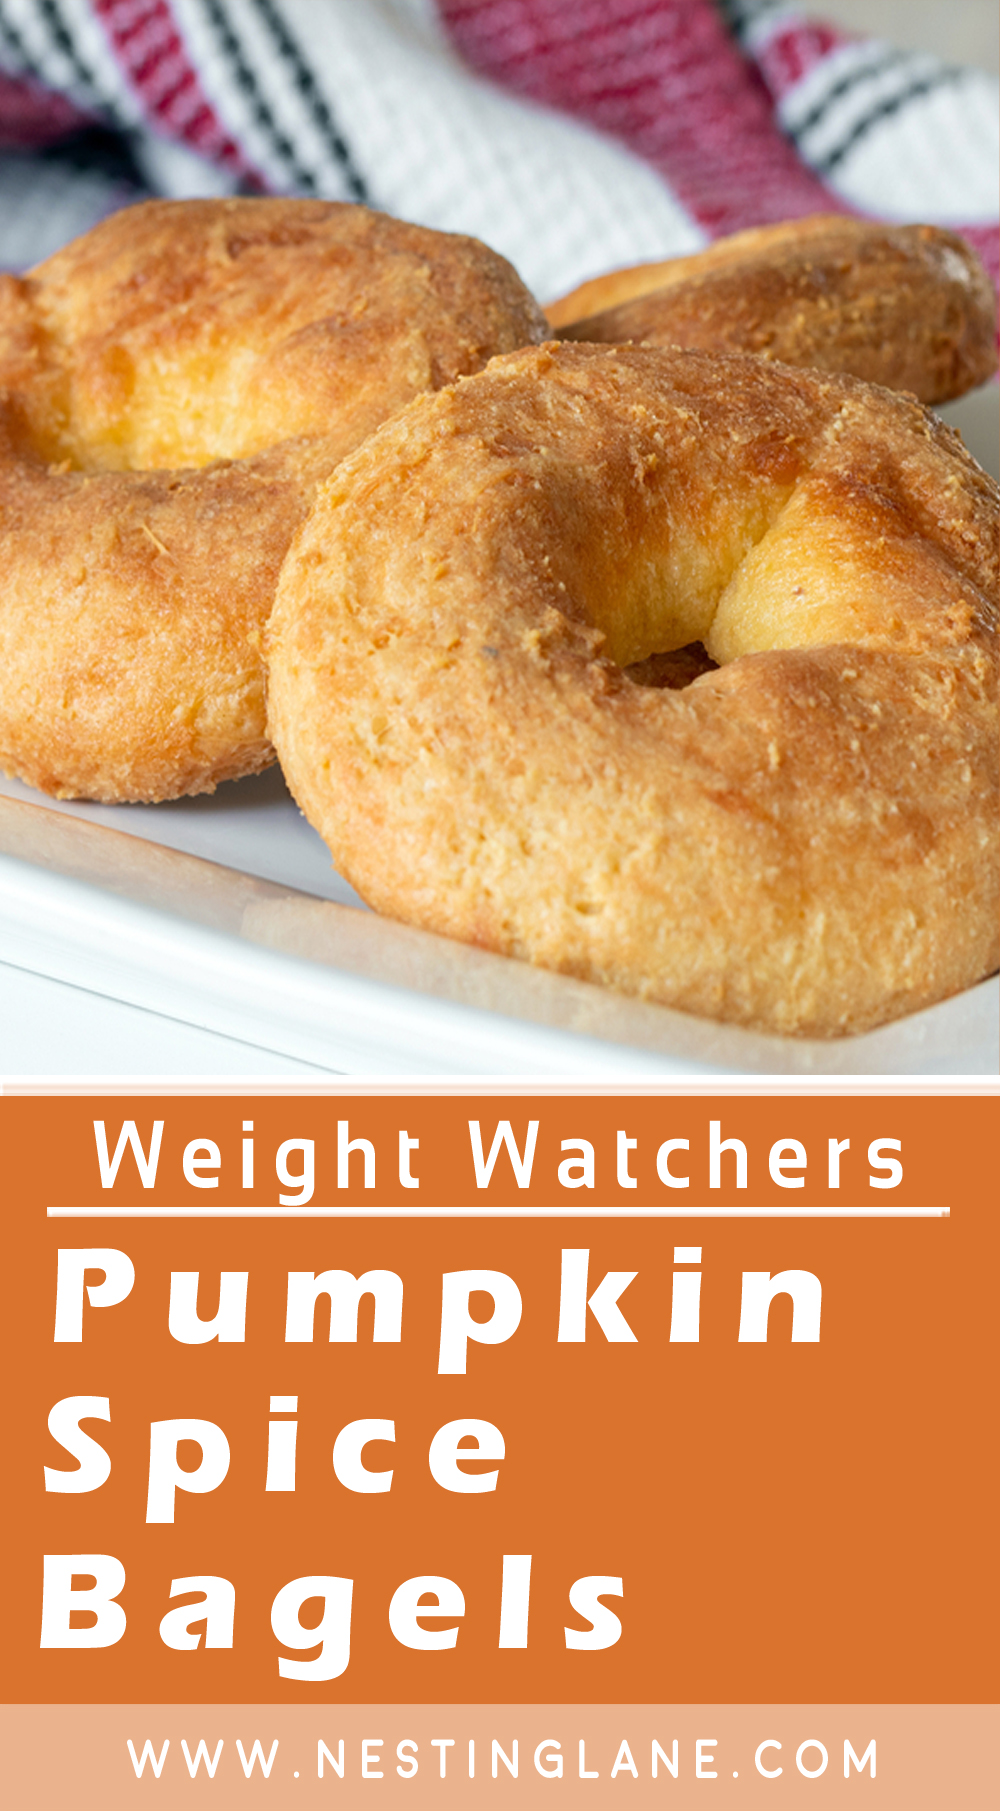 Graphic for Pinterest of Weight Watchers Pumpkin Spice Bagels Recpe.